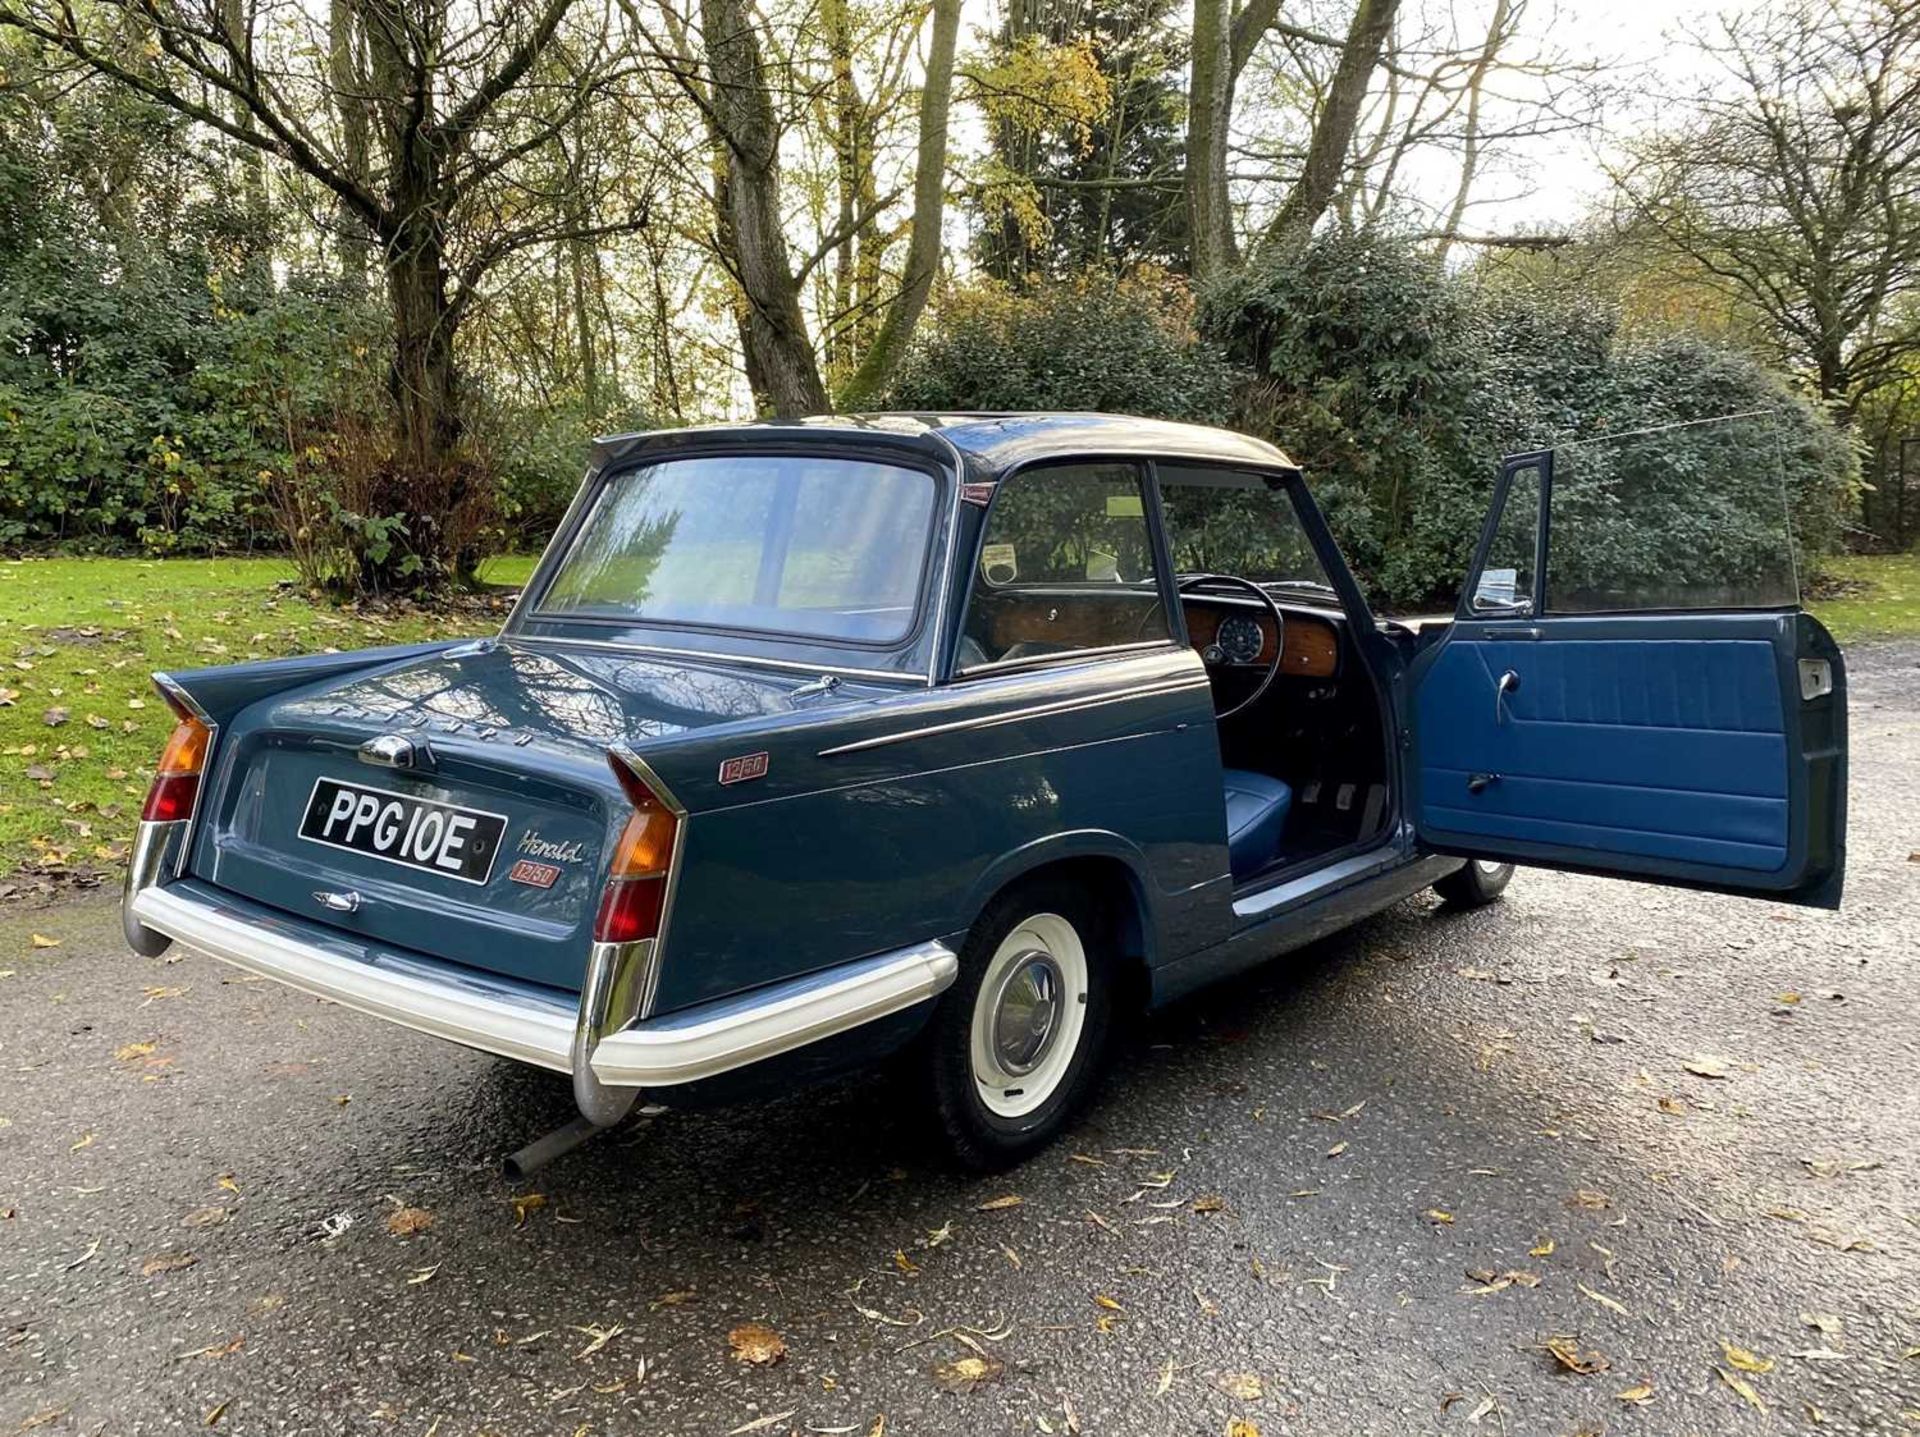 1967 Triumph Herald 12/50 *** NO RESERVE *** Subject to an extensive restoration - Image 26 of 97